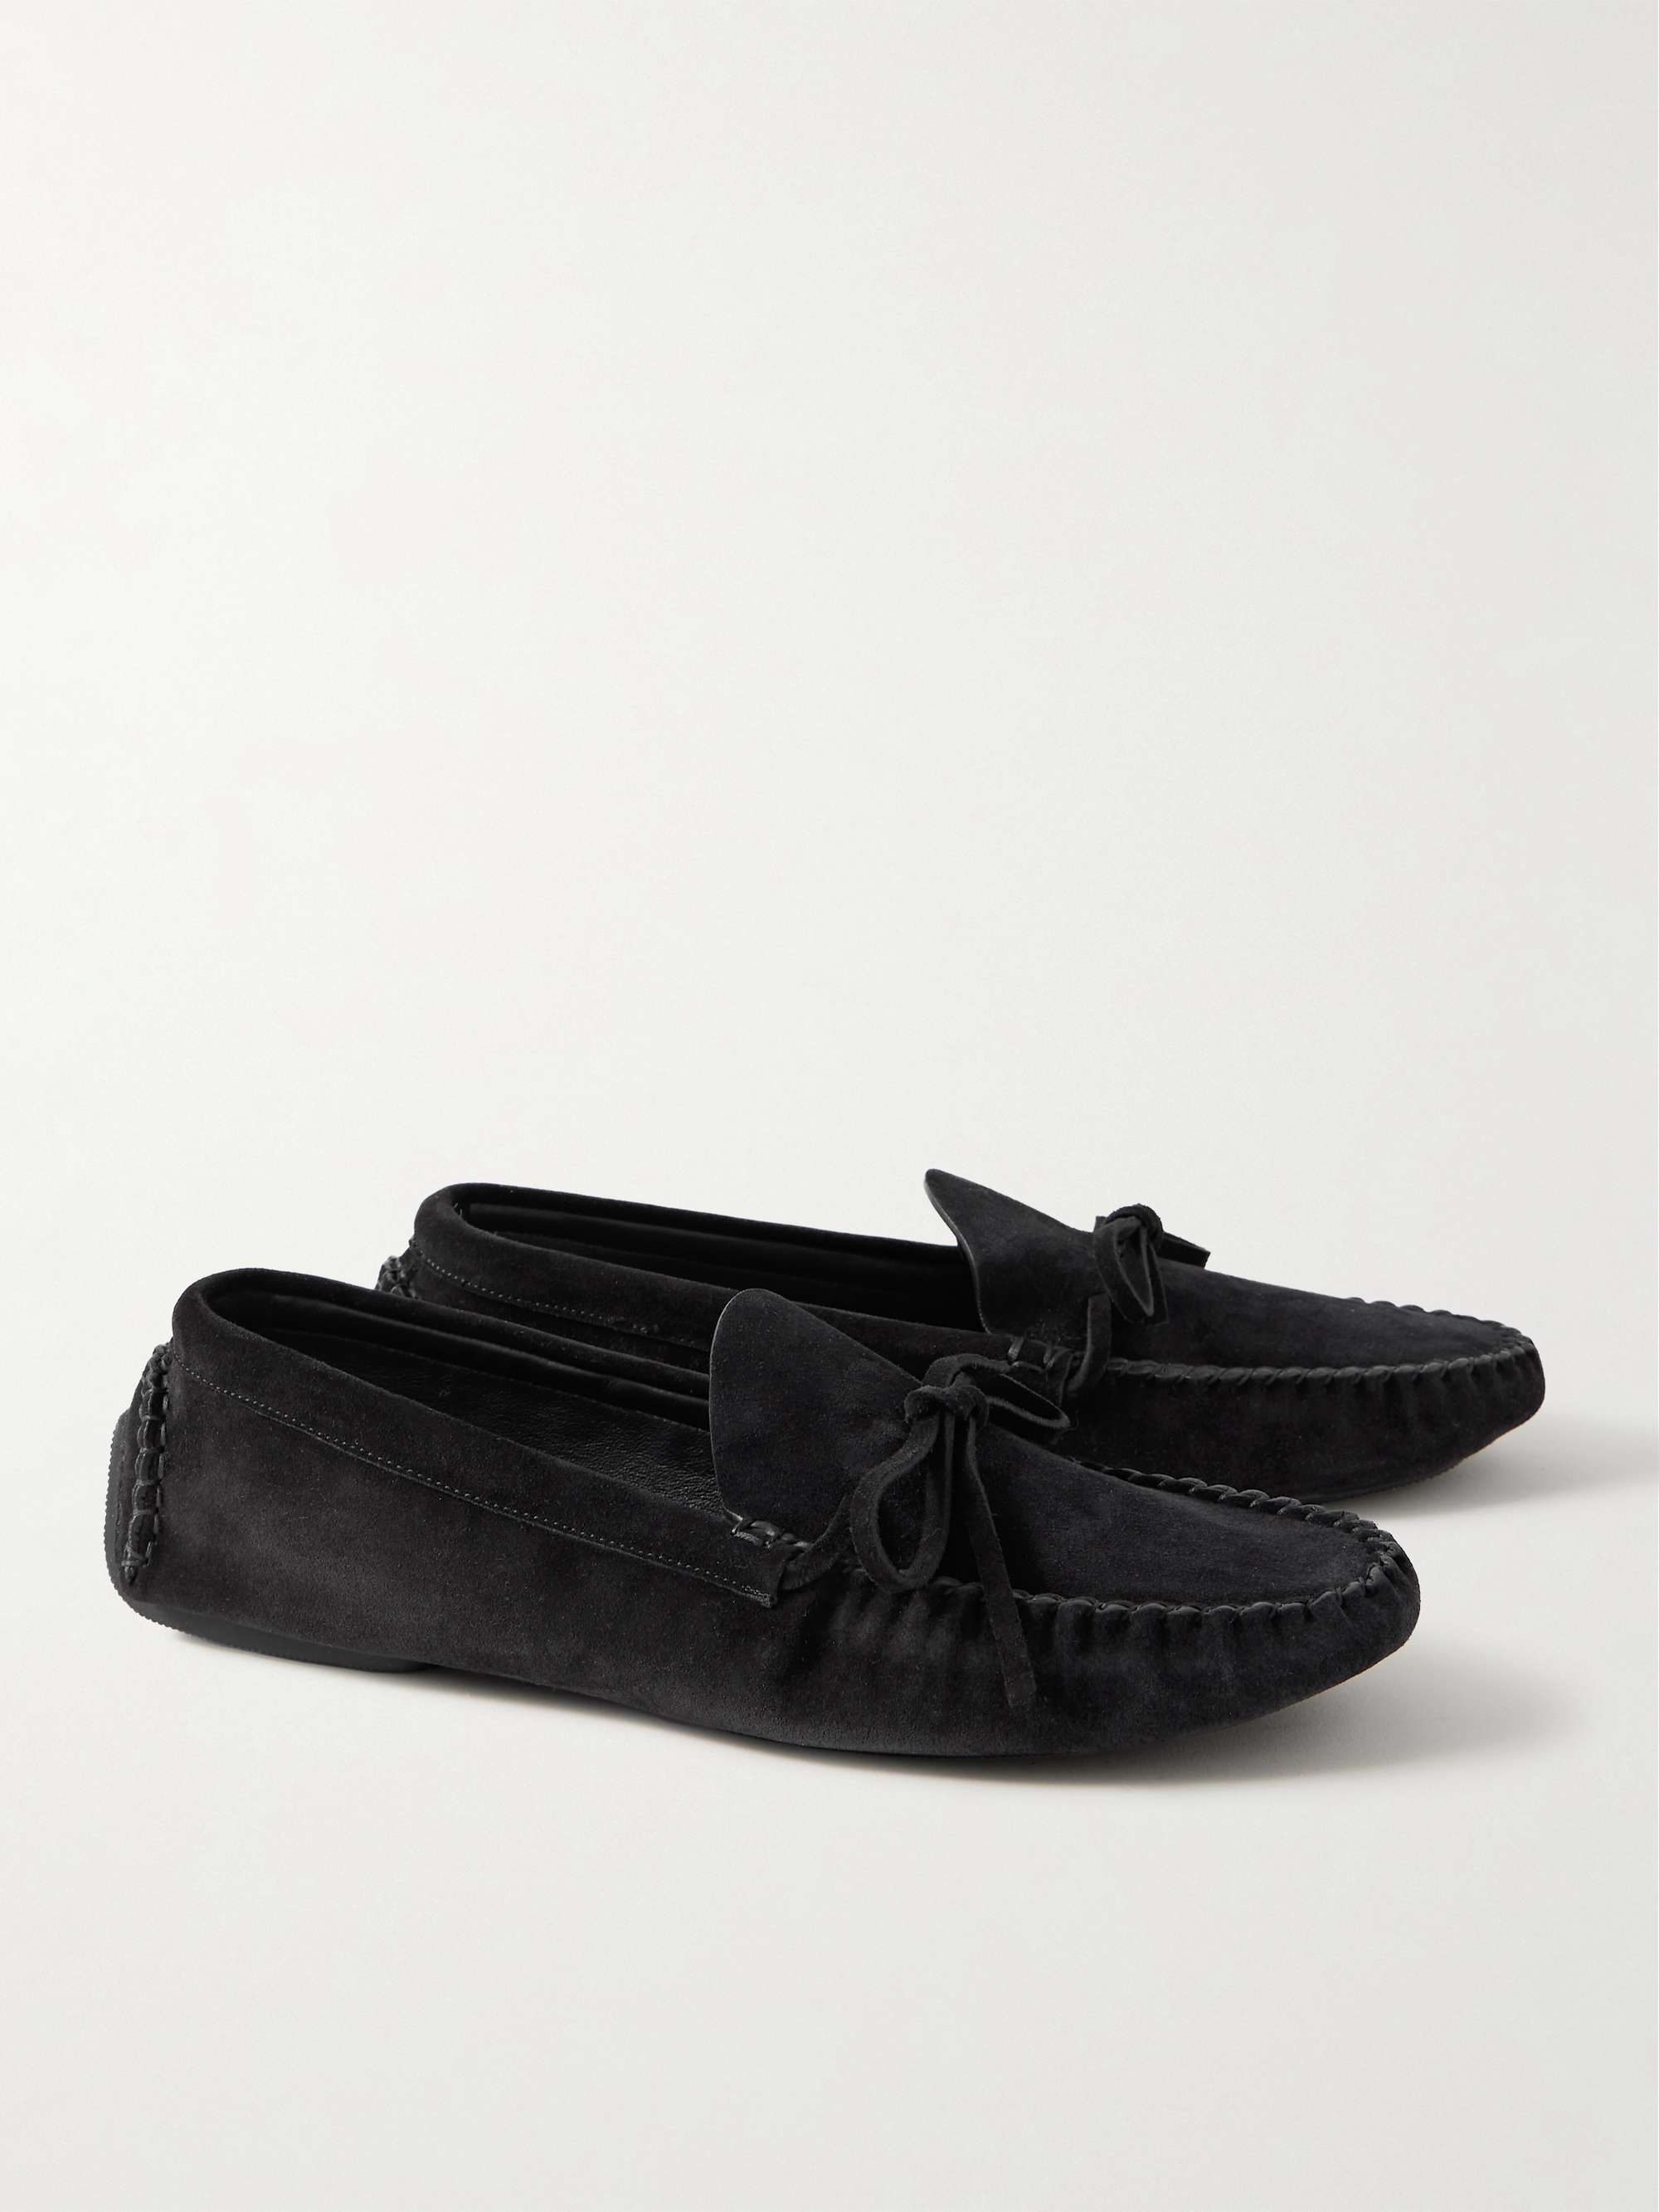 THE ROW Lucca Suede Driving Shoes for Men | MR PORTER